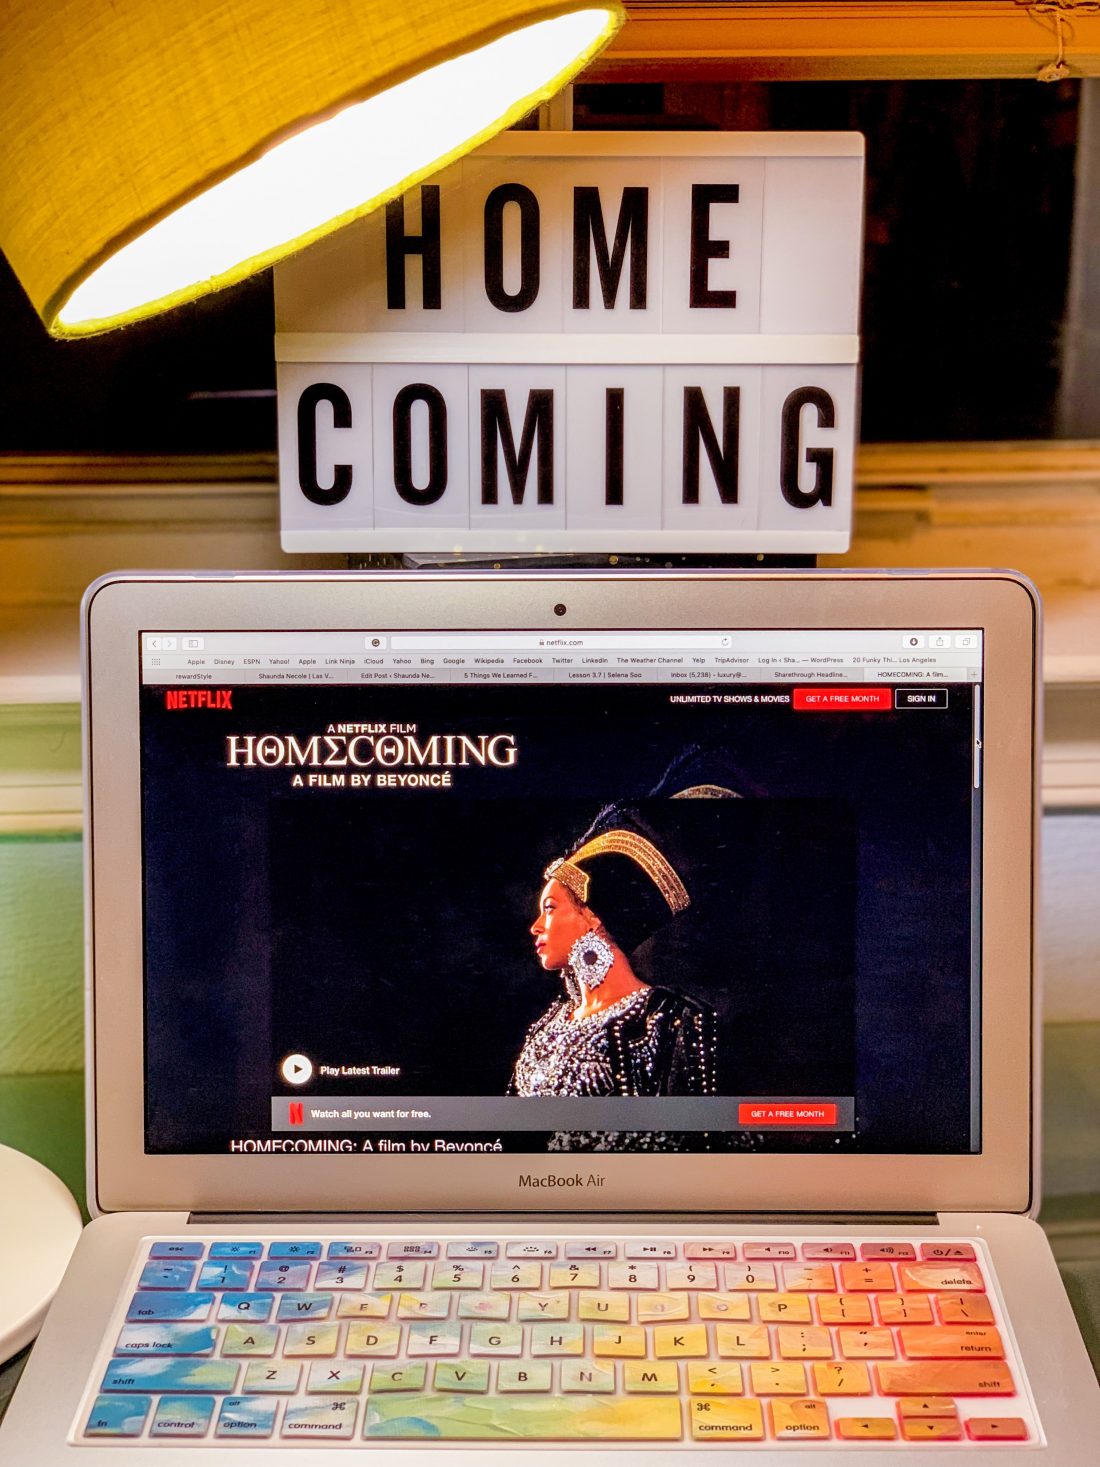 Shaunda Necole on Thrive Global- 5 Things We Learned From Beyoncé&#039;s Homecoming Movie